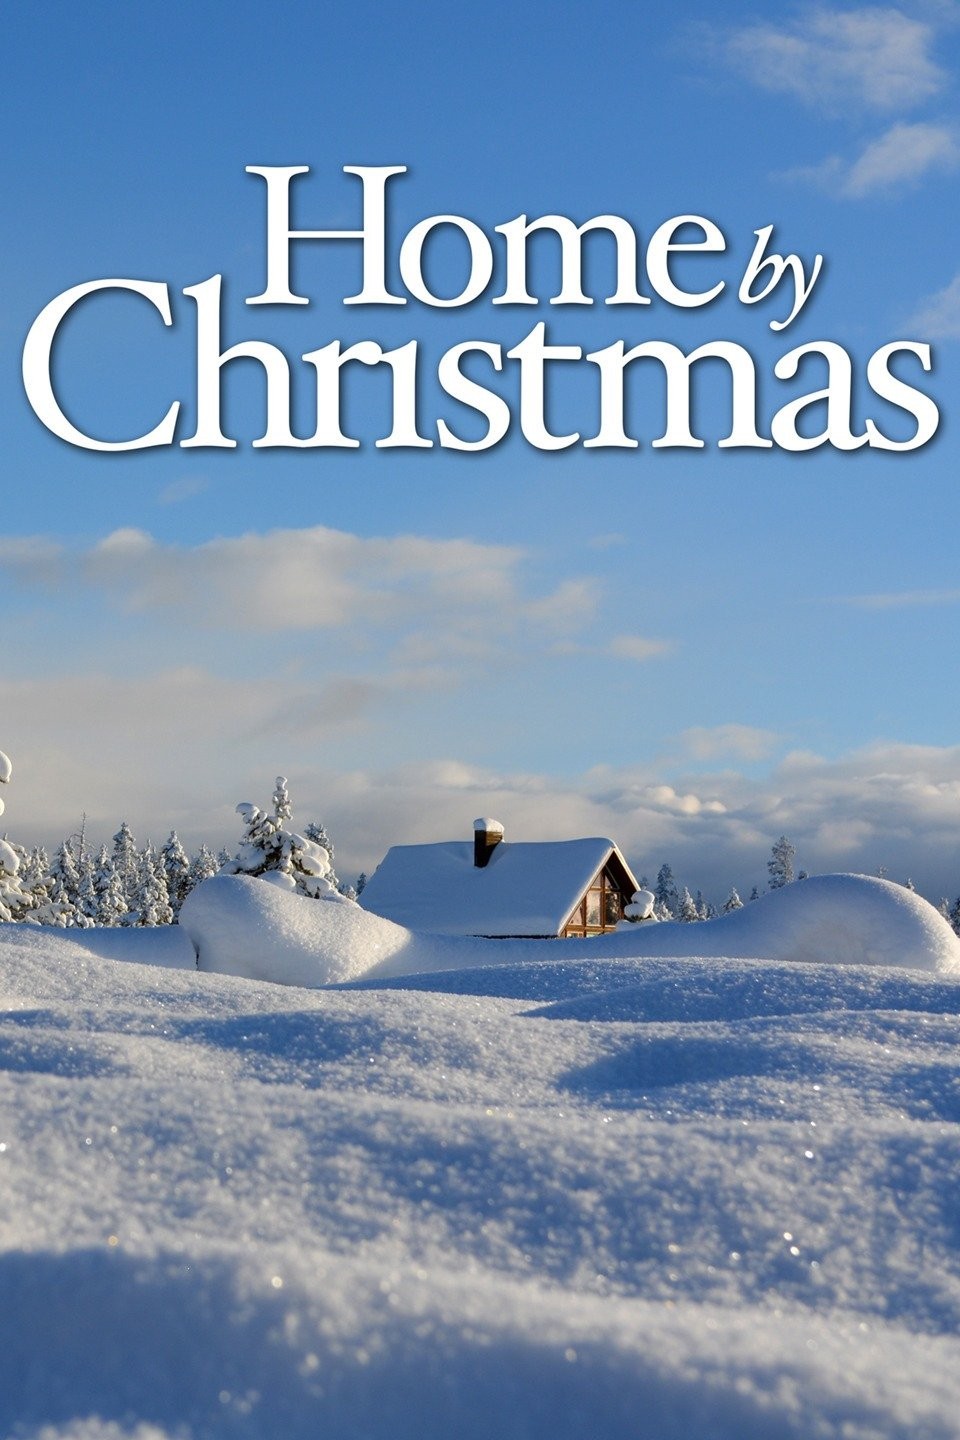 Home by Christmas | Rotten Tomatoes